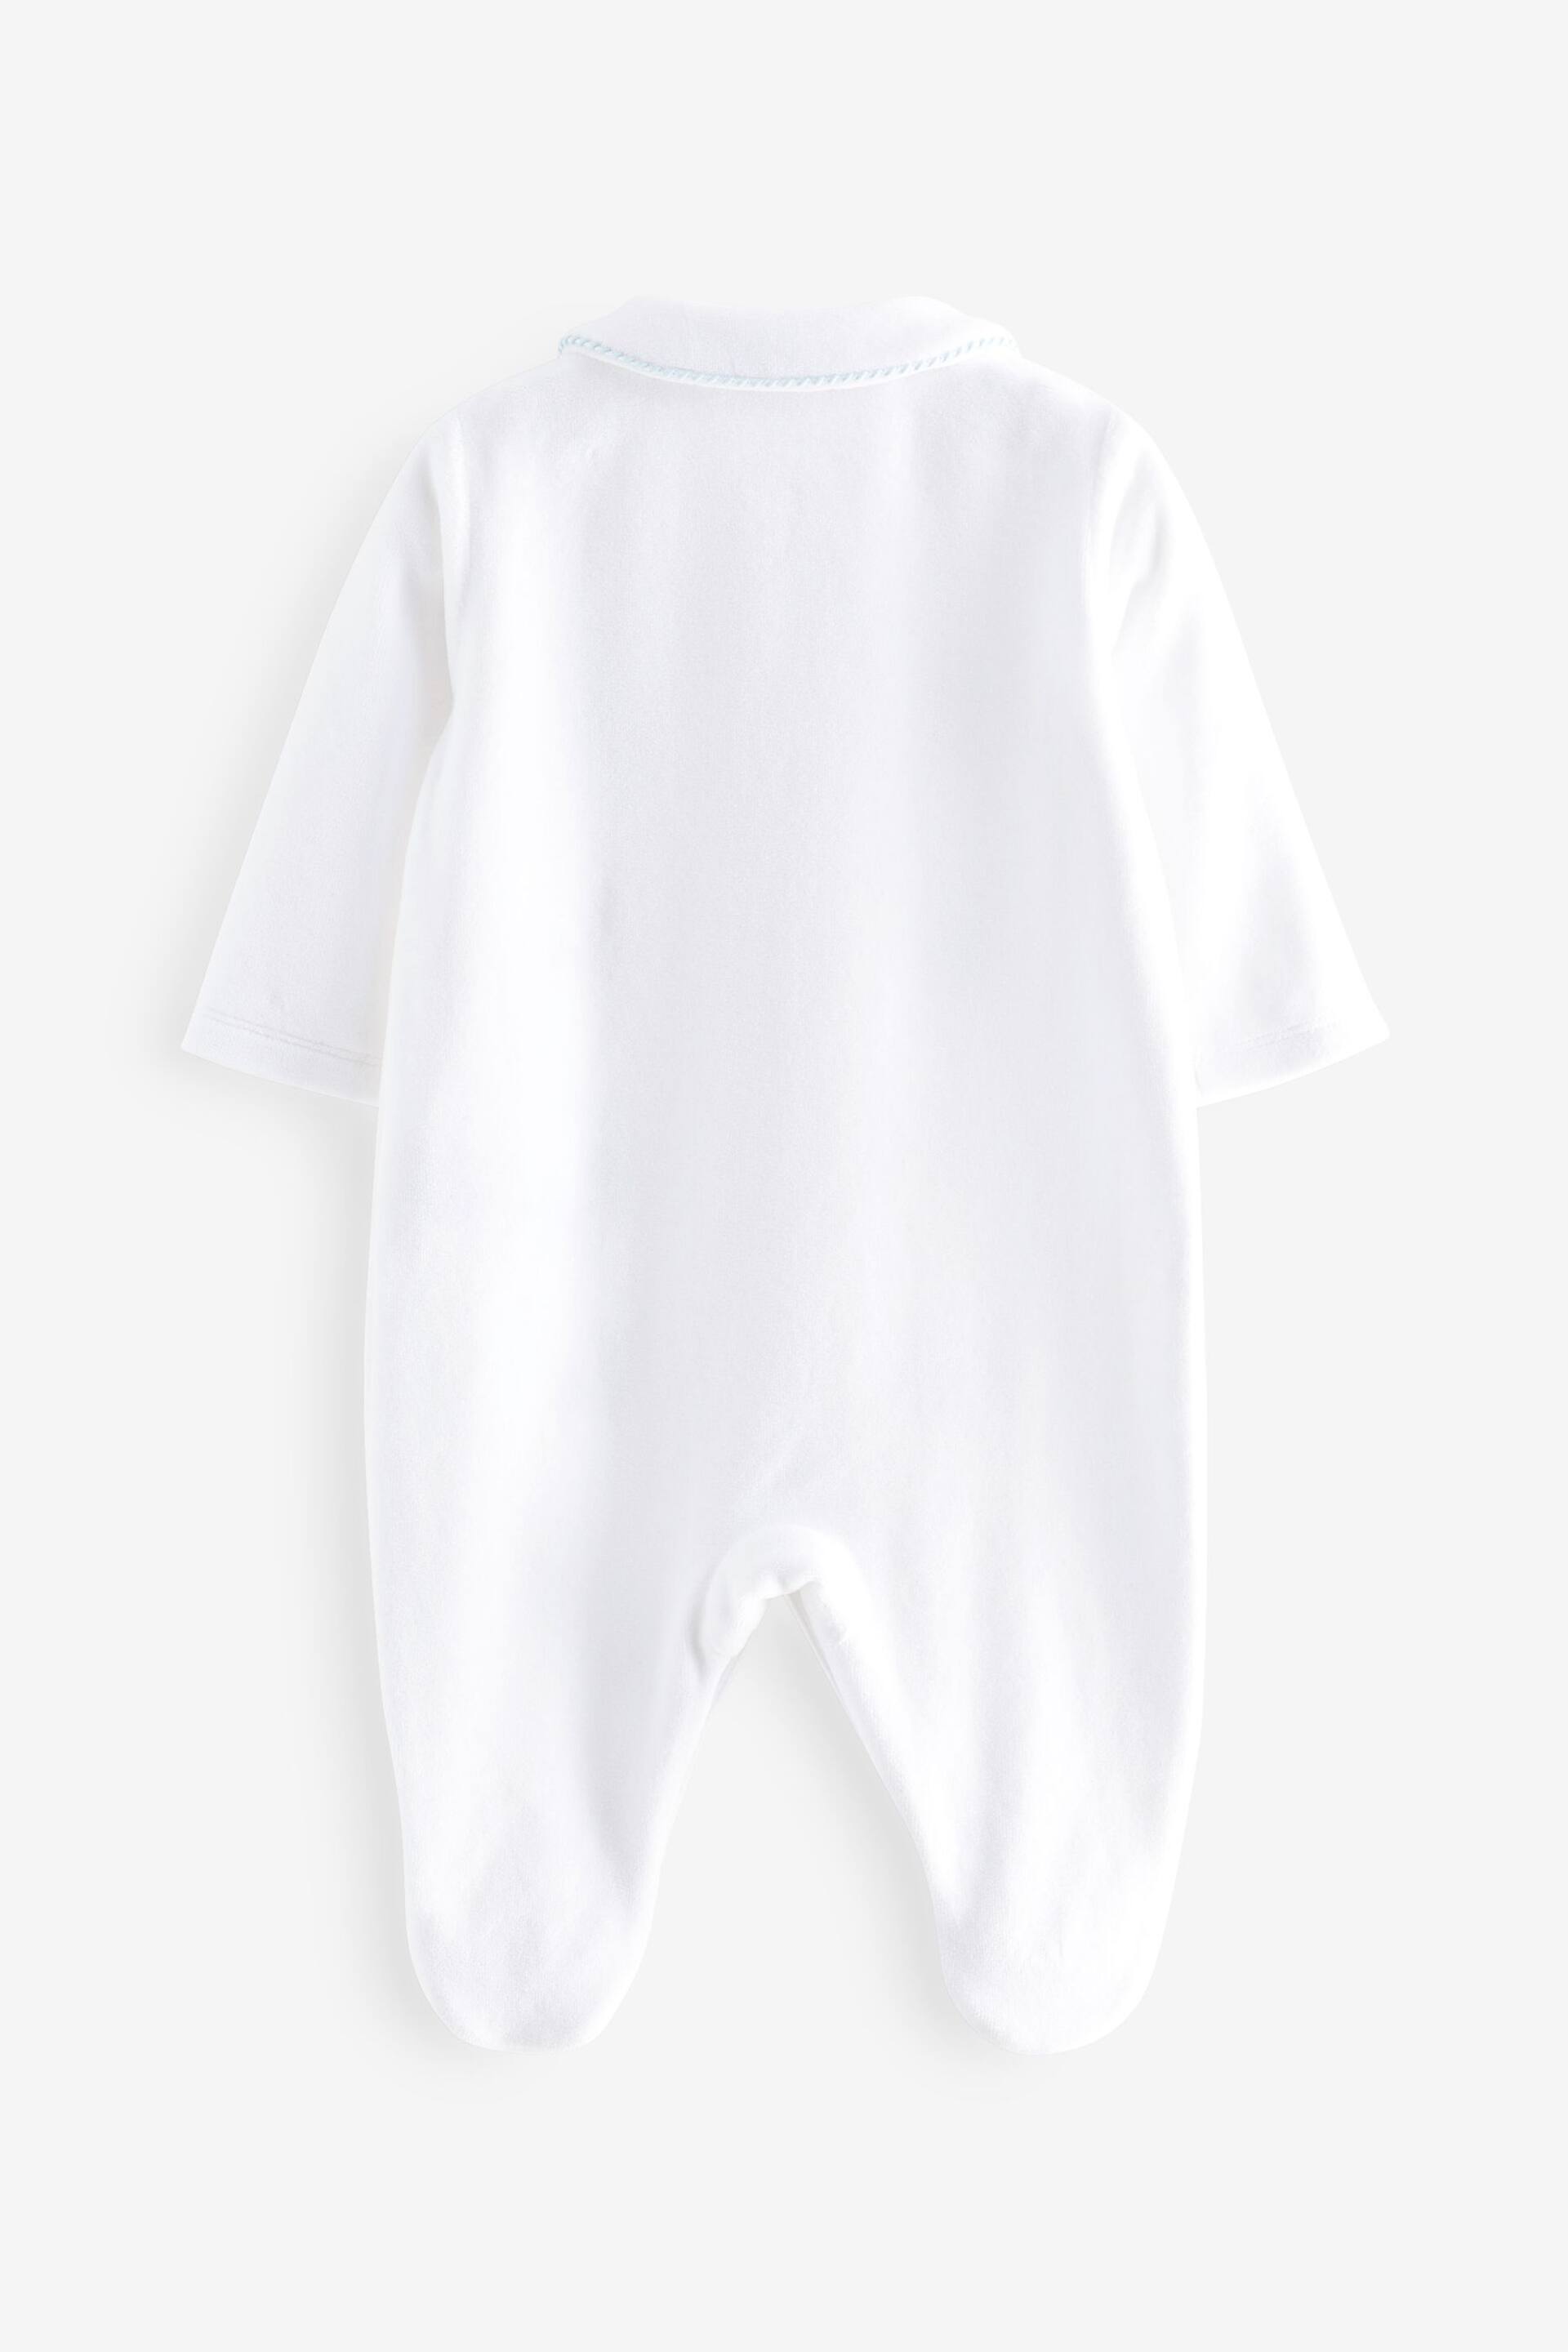 White Velour Embroidery Sleepsuit 1 Pack (0mths-3yrs) - Image 5 of 6